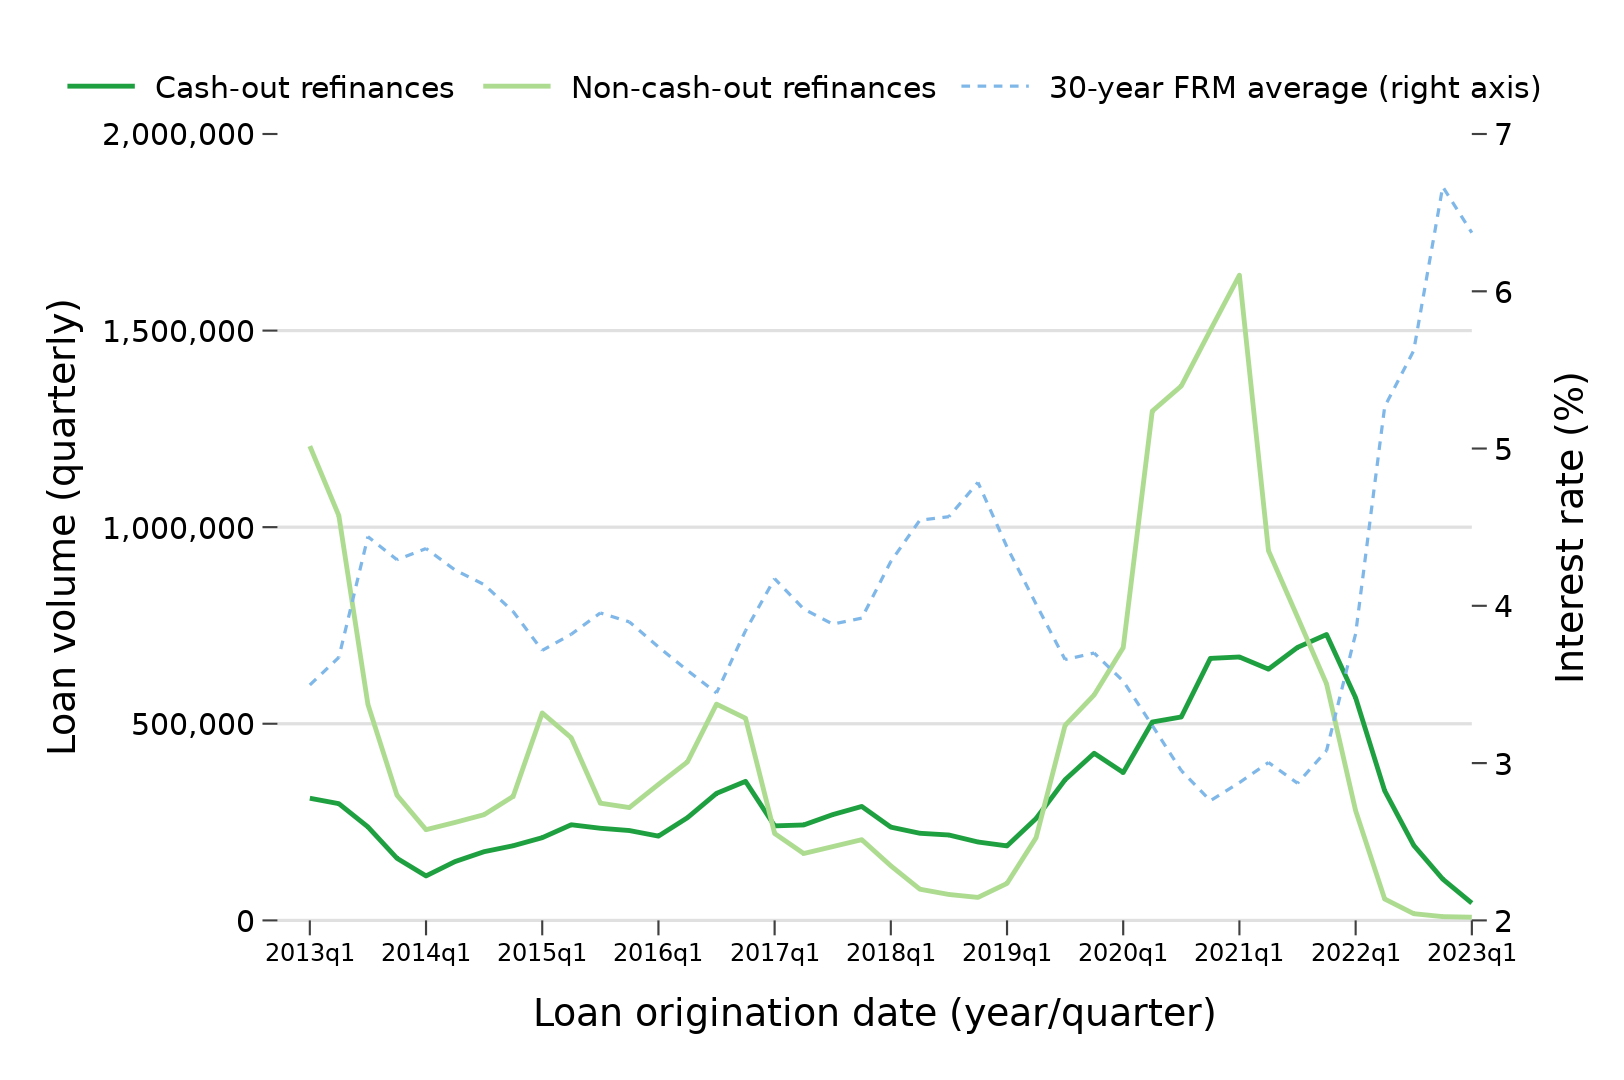 Line graph showing quarterly loan volume of cash-out refinances and non-cash-out refinances, by quarter, from the first quarter of 2013 to the first quarter of 2023, measured on the left-side vertical axis. There is also a line graph for the average interest rate on 30-year fixed rate mortgages, measured on the right-side vertical axis. From 2013 to 2019, cash-out refinances averaged about 240,000 originations per quarter, followed by an increase to almost 730,000 cash-out refinances in the fourth quarter of 2021. Cash-out refinance volumes then fell throughout 2022, down to 44,000 originations in the first quarter of 2023. There was a higher proportion of cash-out refinances compared to non-cash-out refinances from 2017 to 2019 and from 2022 to 2023, coinciding with increases in interest rates.